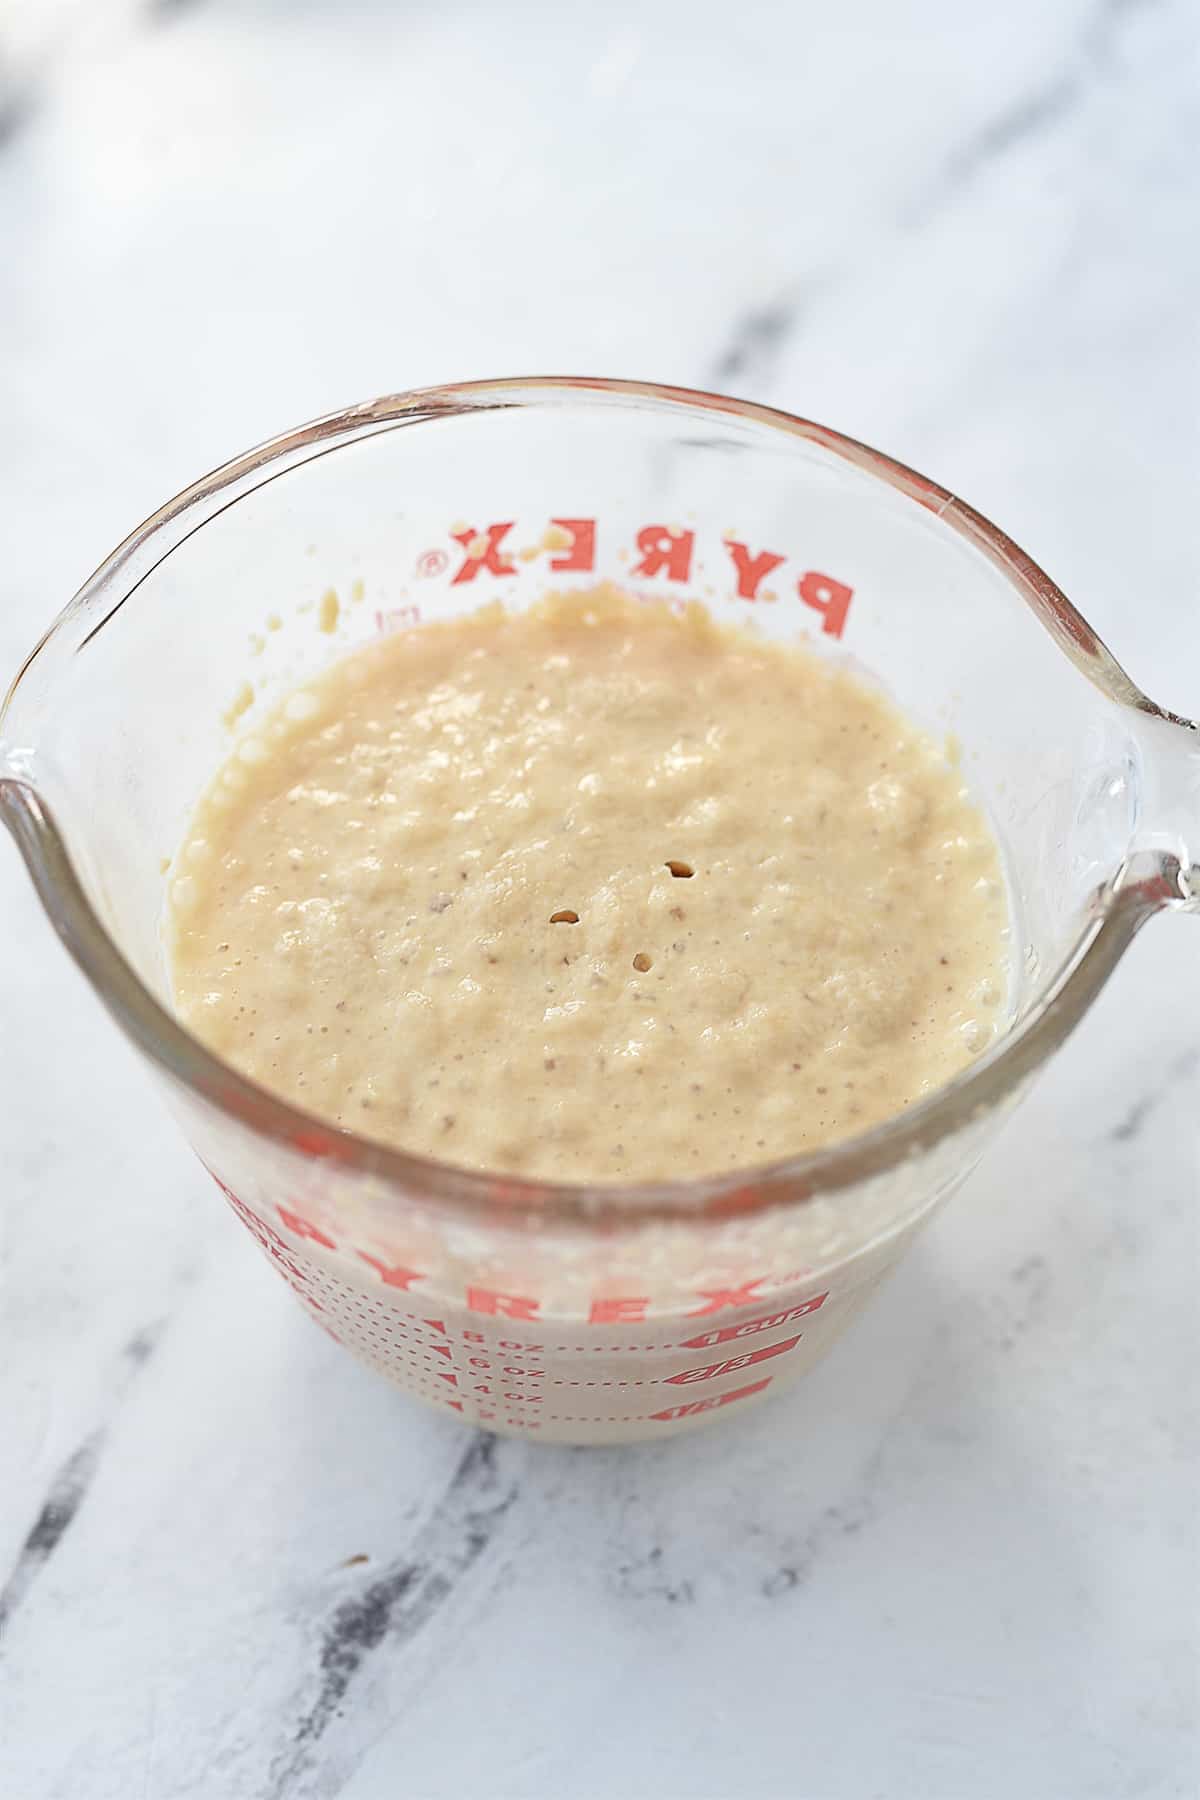 bubbly yeast mixture